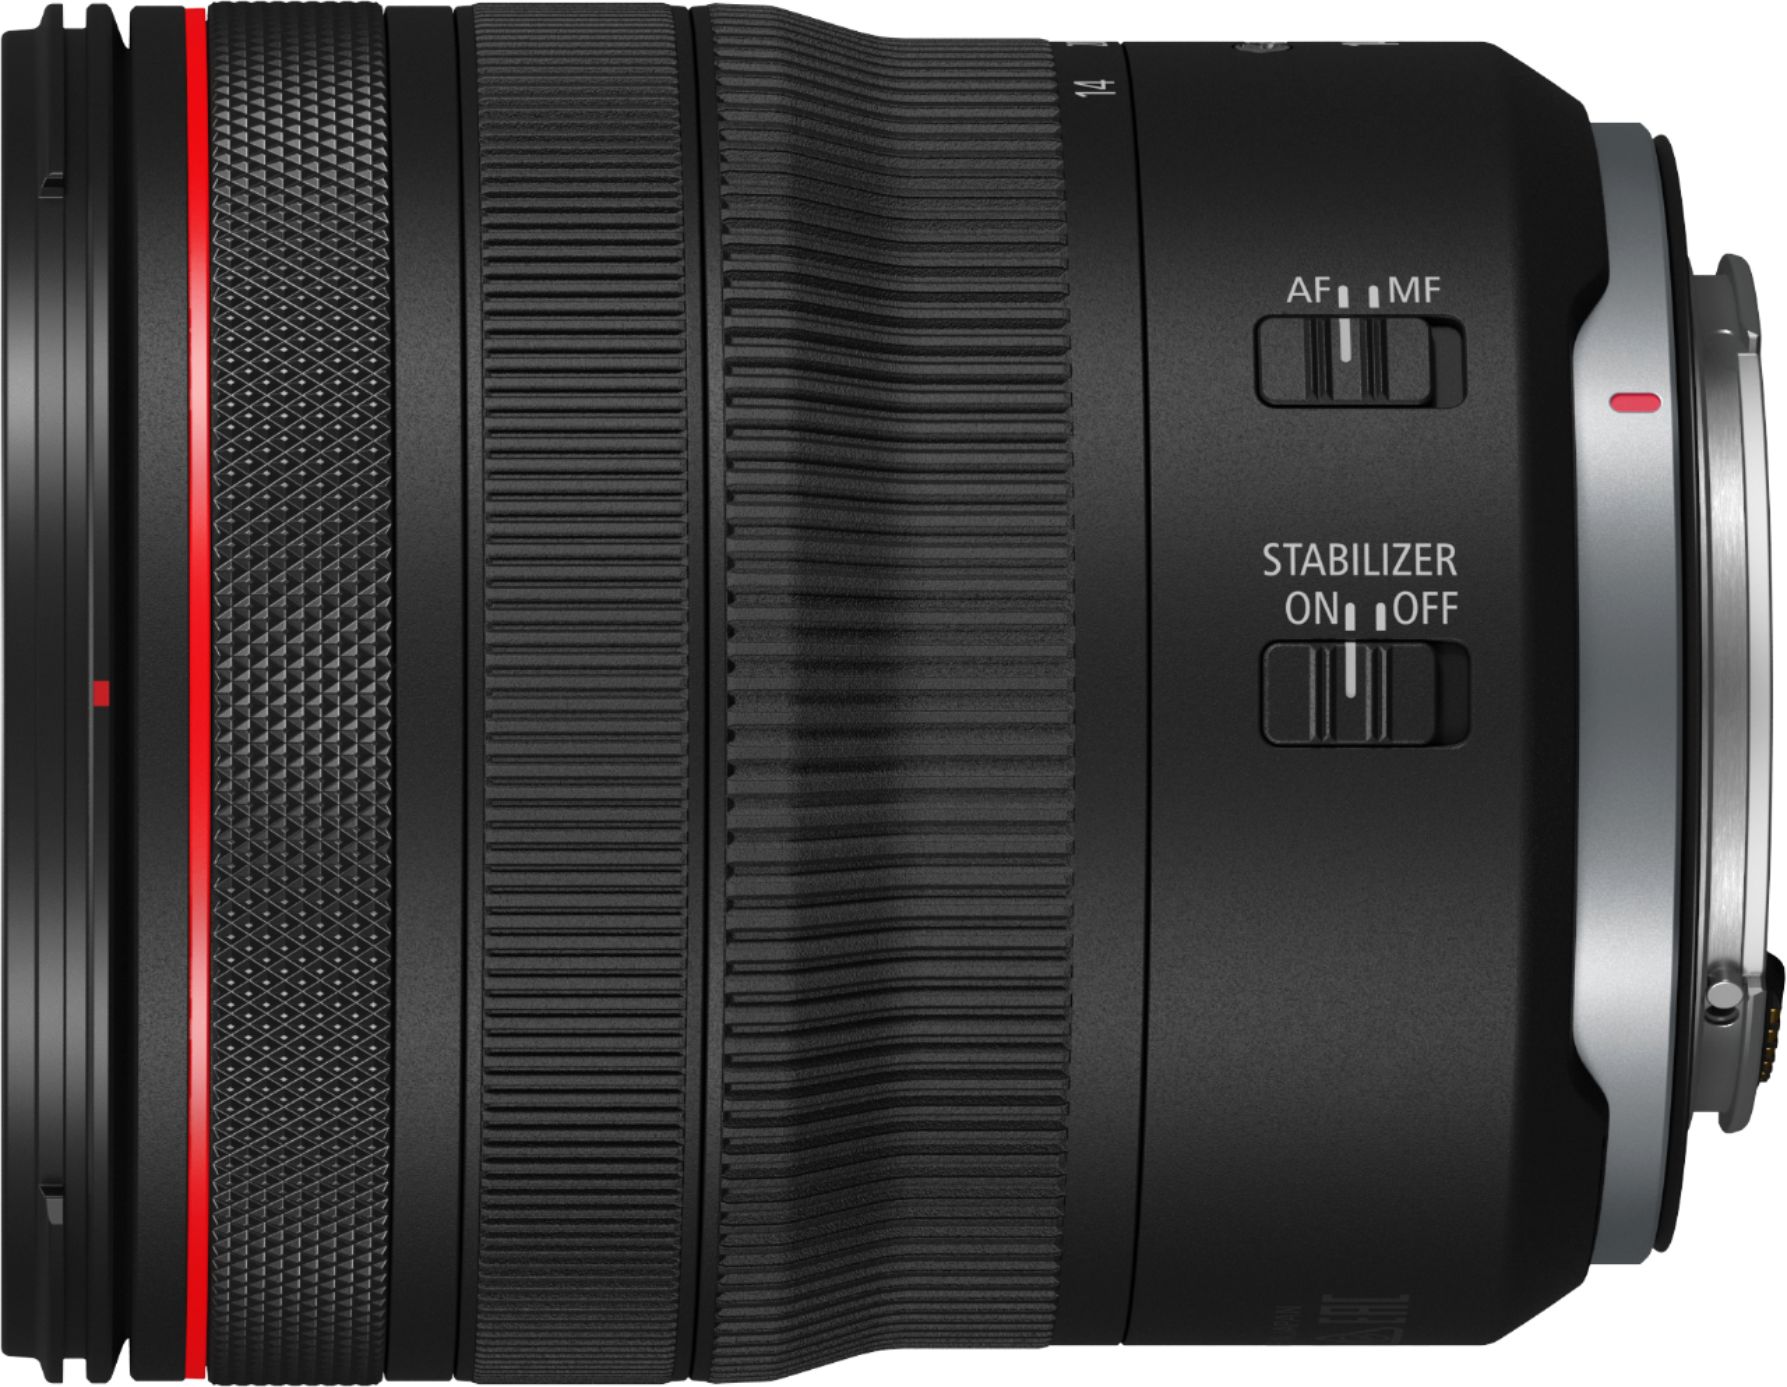 Angle View: RF 14-35mm f/4L IS USM Ultra-Wide-Angle Zoom Lens for RF Mount Canon Cameras - Black